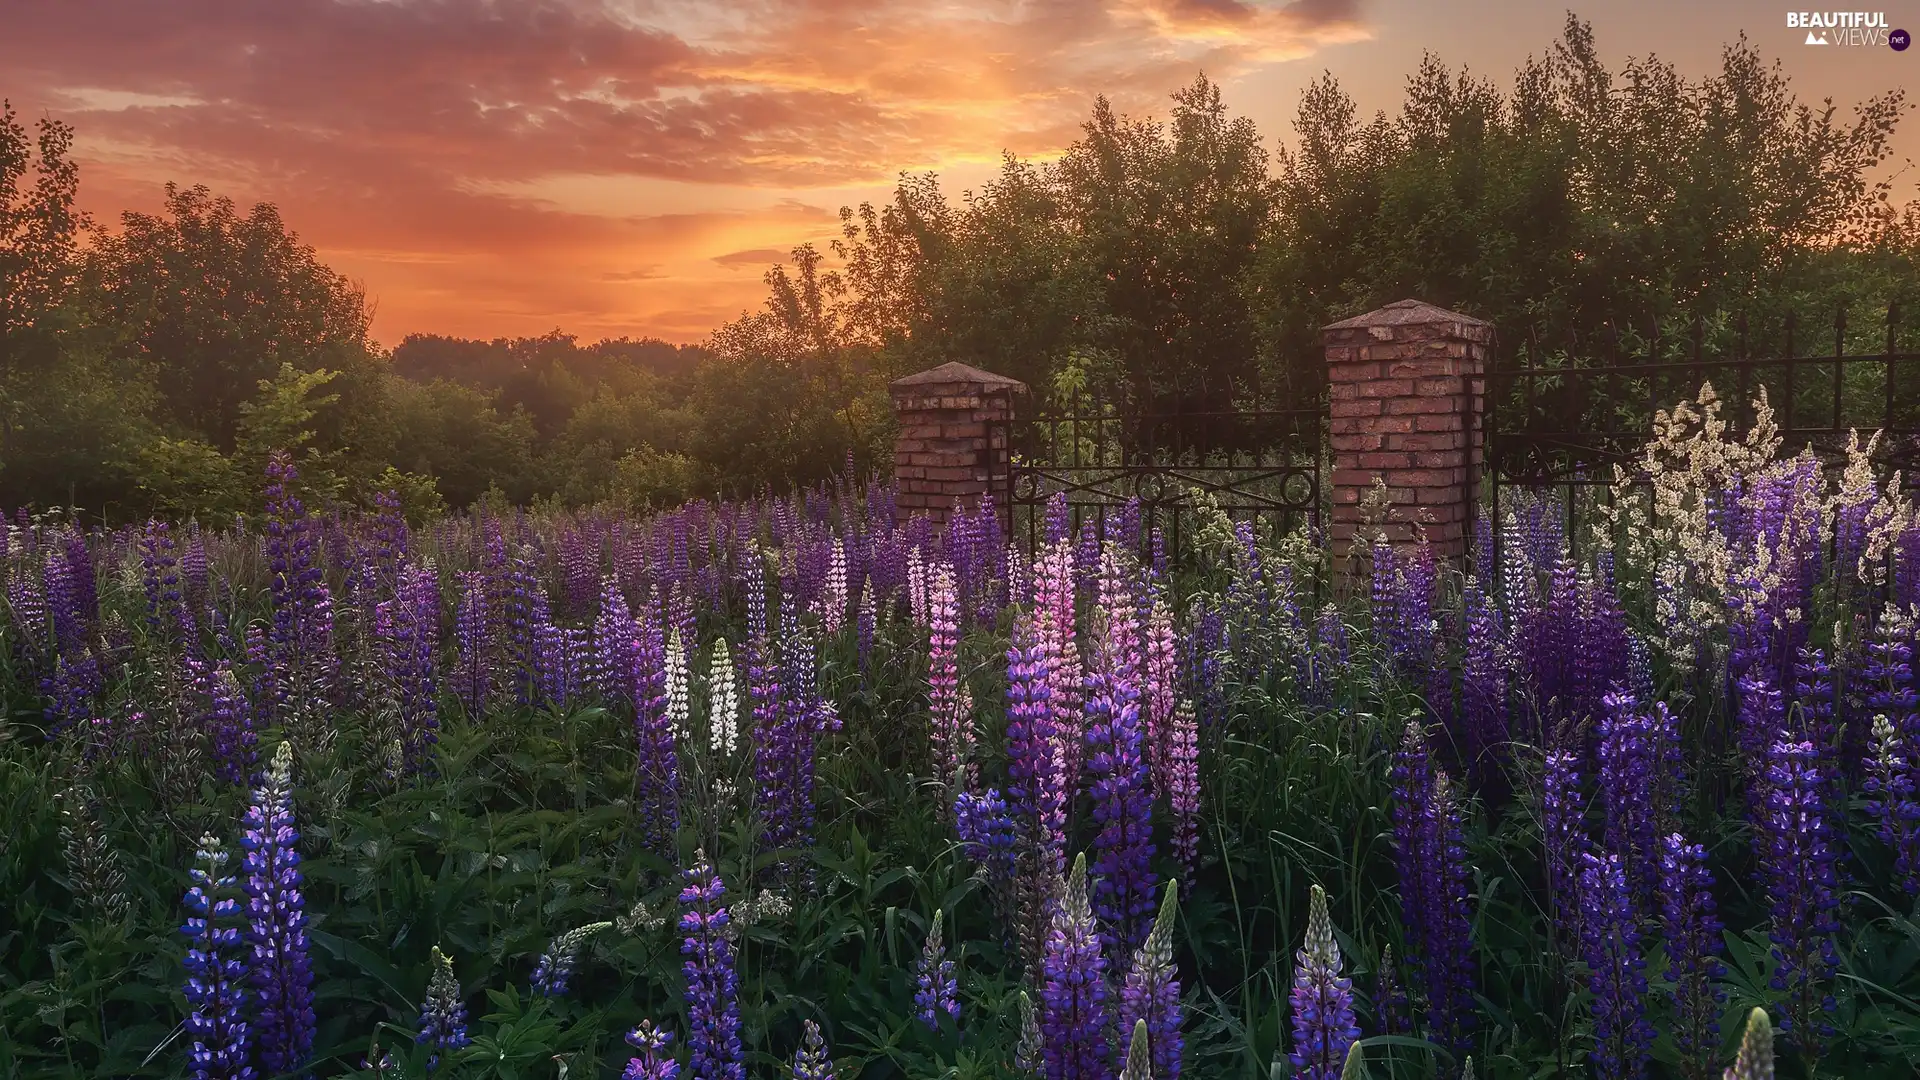 lupine, Meadow, trees, Flowers, Great Sunsets, fence, viewes